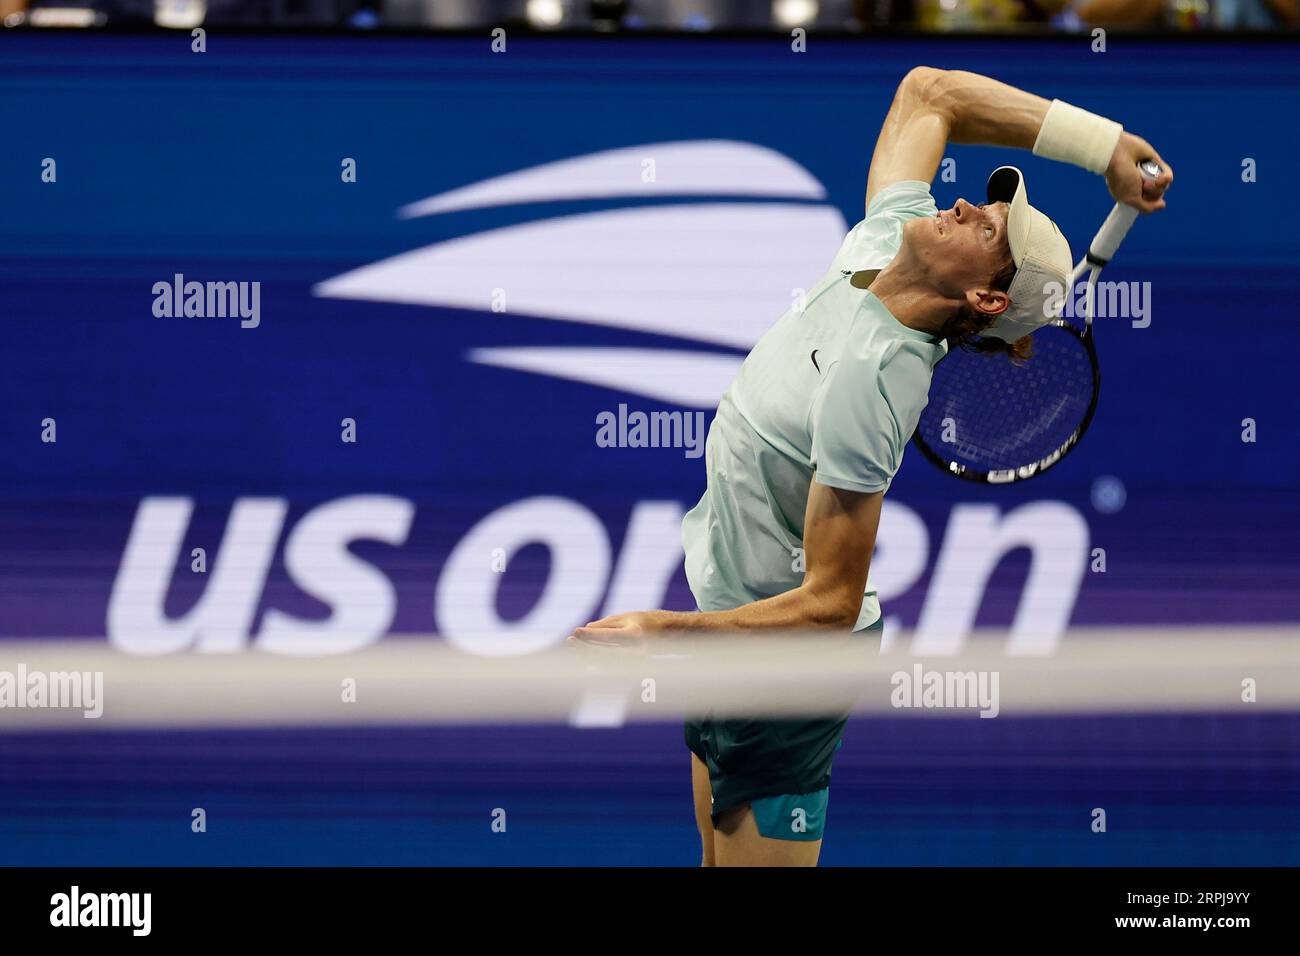 Jannik Sinner, of Italy, serves to Alexander Zverev, of Germany, during the fourth round of the U.S. Open tennis championships, Monday, Sept